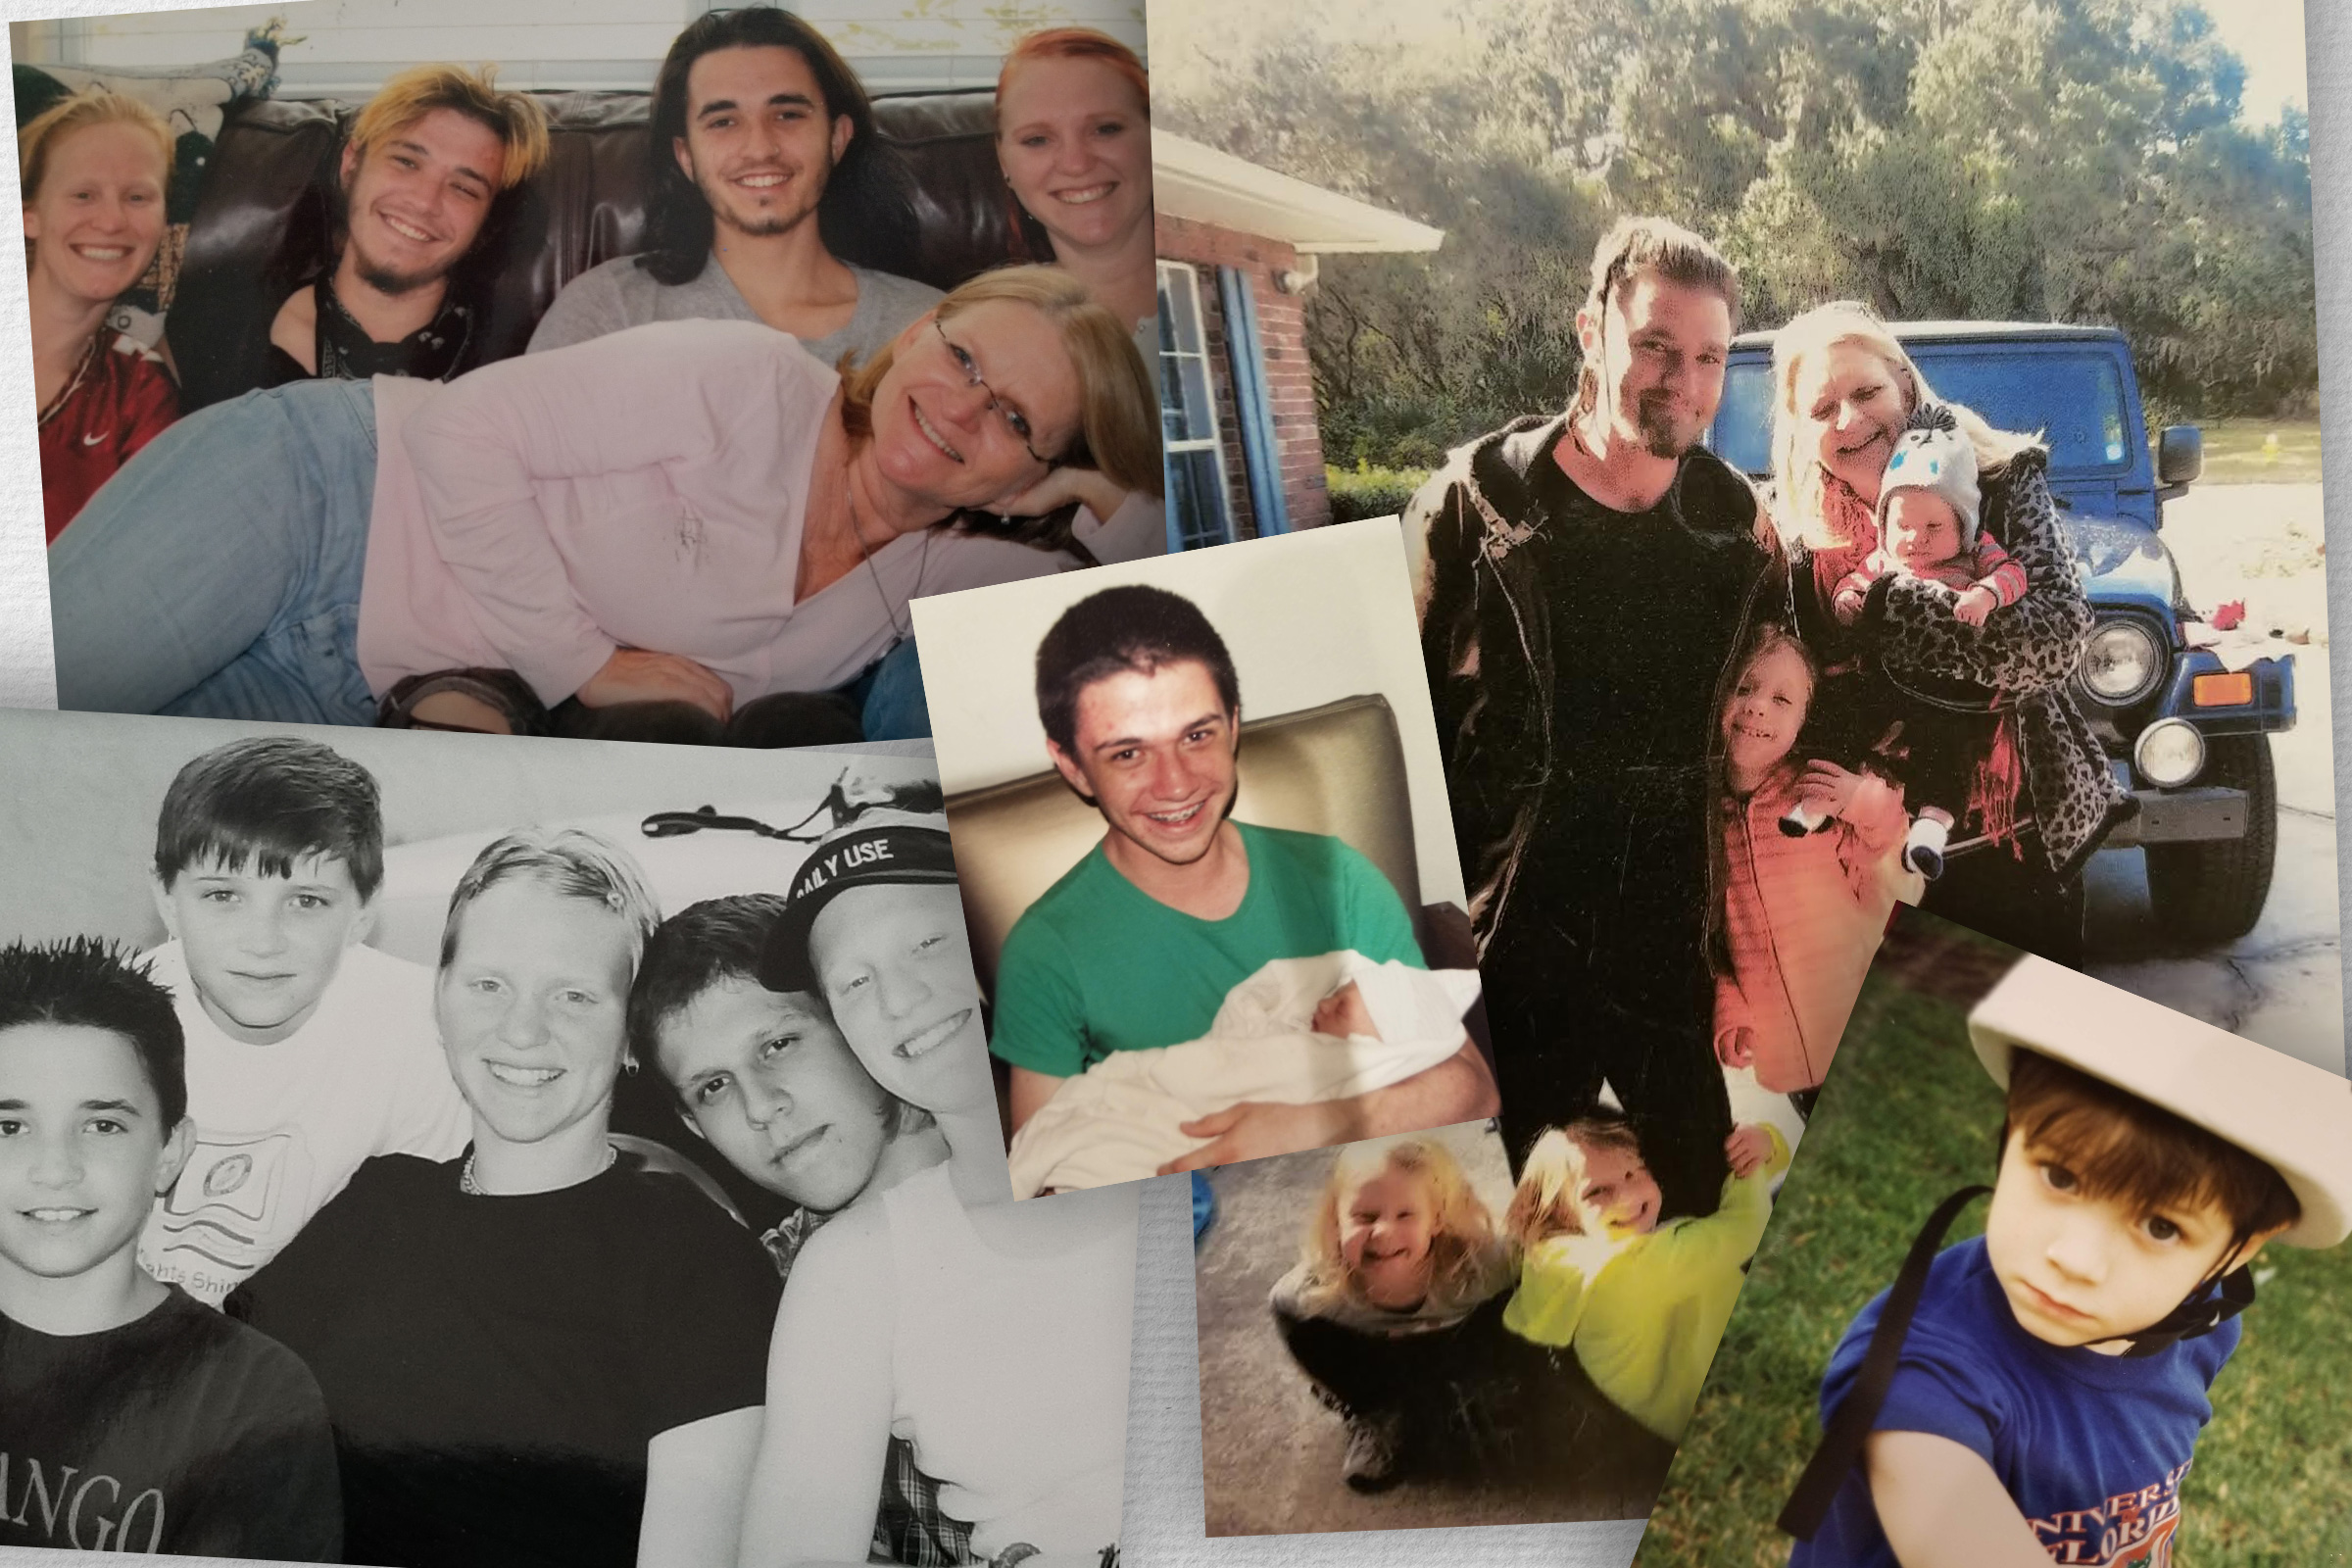 Photos of Robert Mast and his family members. (Courtesy of Mindy Pendleton)